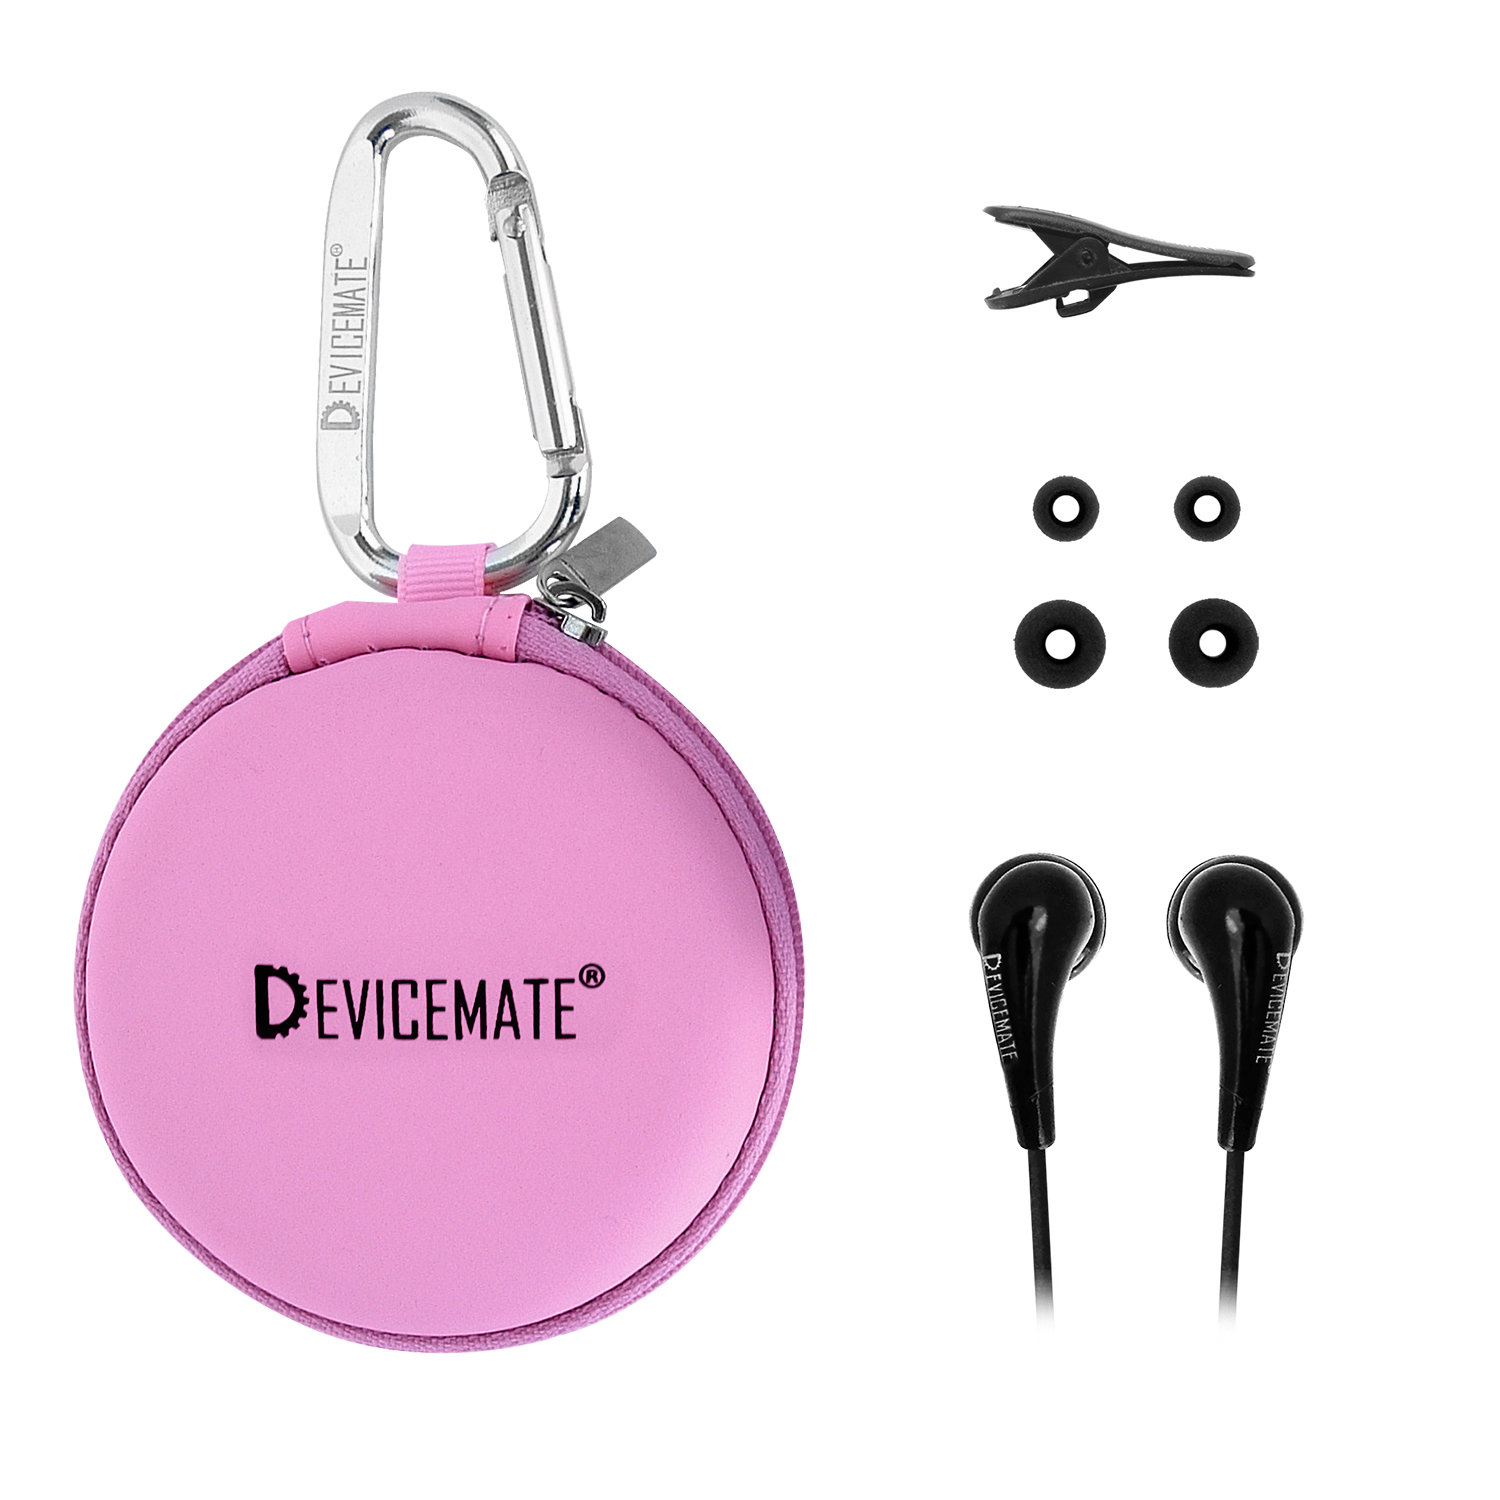 DEVICEMATE® SD 255-CPK In-Ear Stereo Earphones [Pink] Case